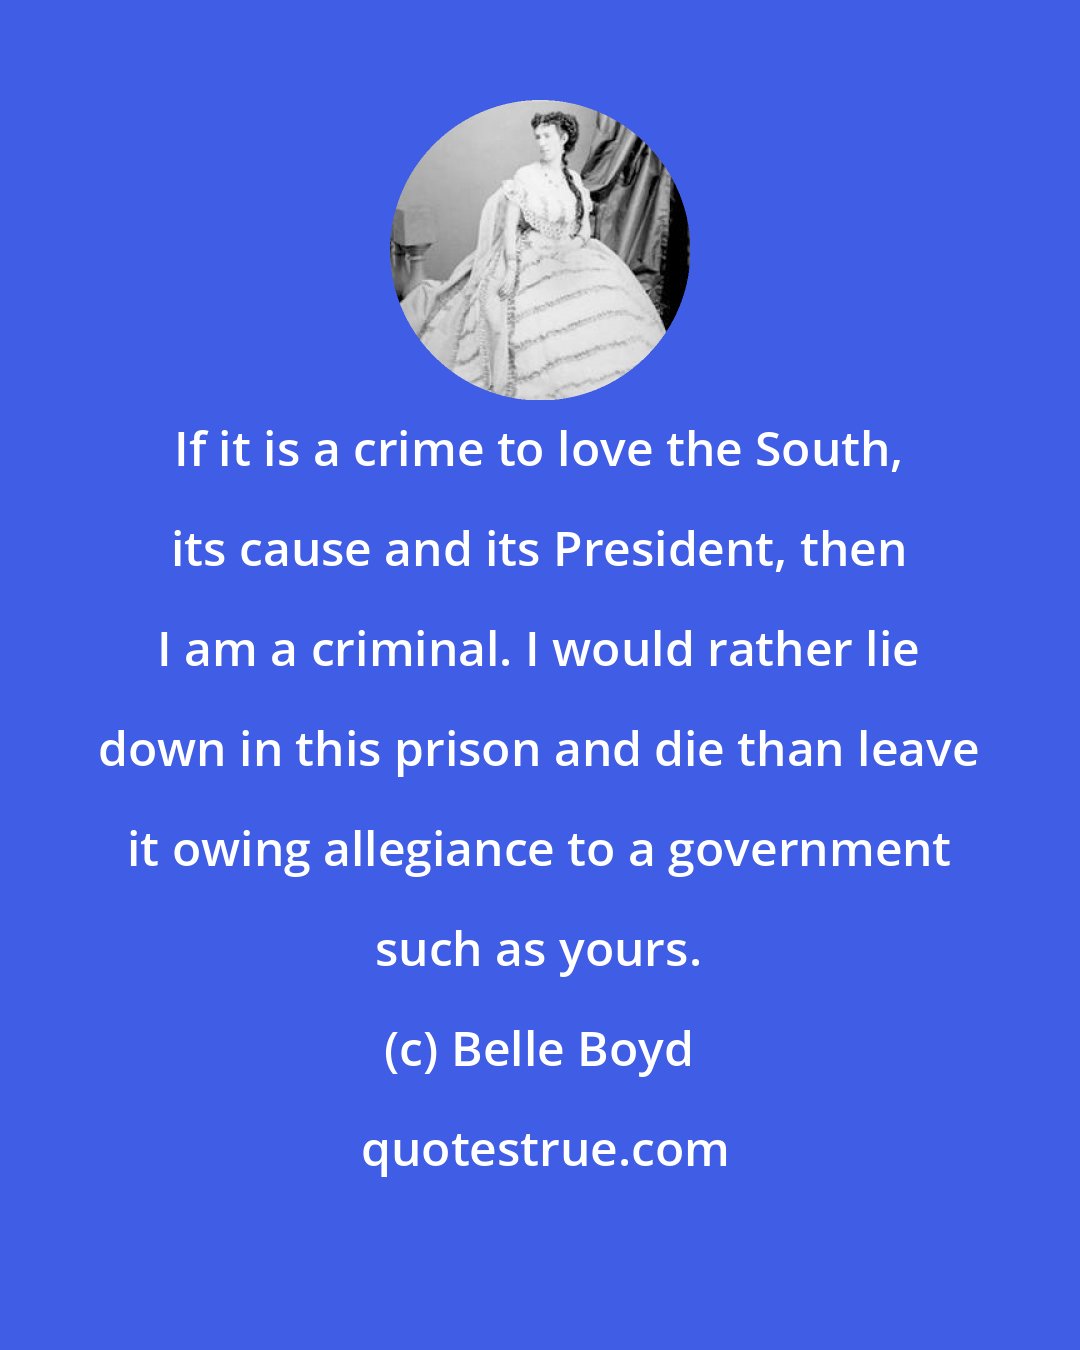 Belle Boyd: If it is a crime to love the South, its cause and its President, then I am a criminal. I would rather lie down in this prison and die than leave it owing allegiance to a government such as yours.